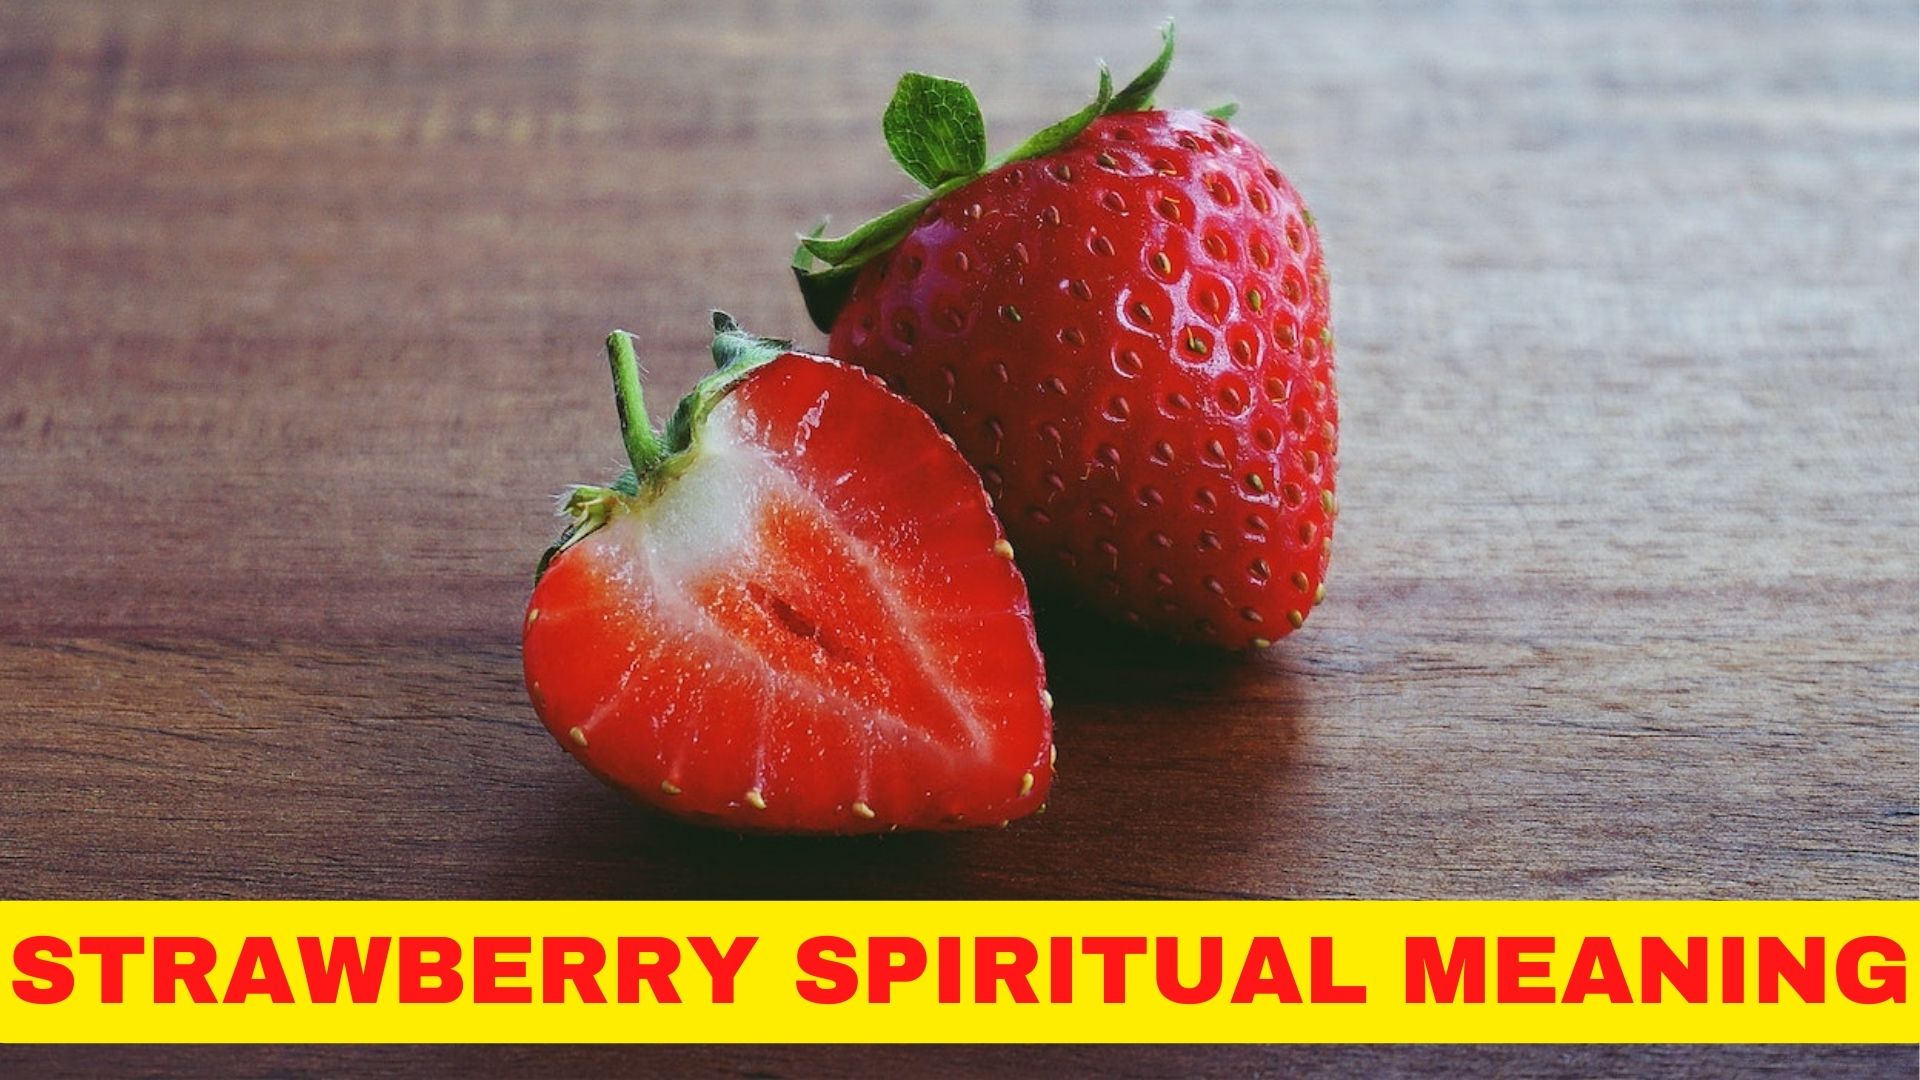 Strawberry Spiritual Meaning - Goodness And Purity